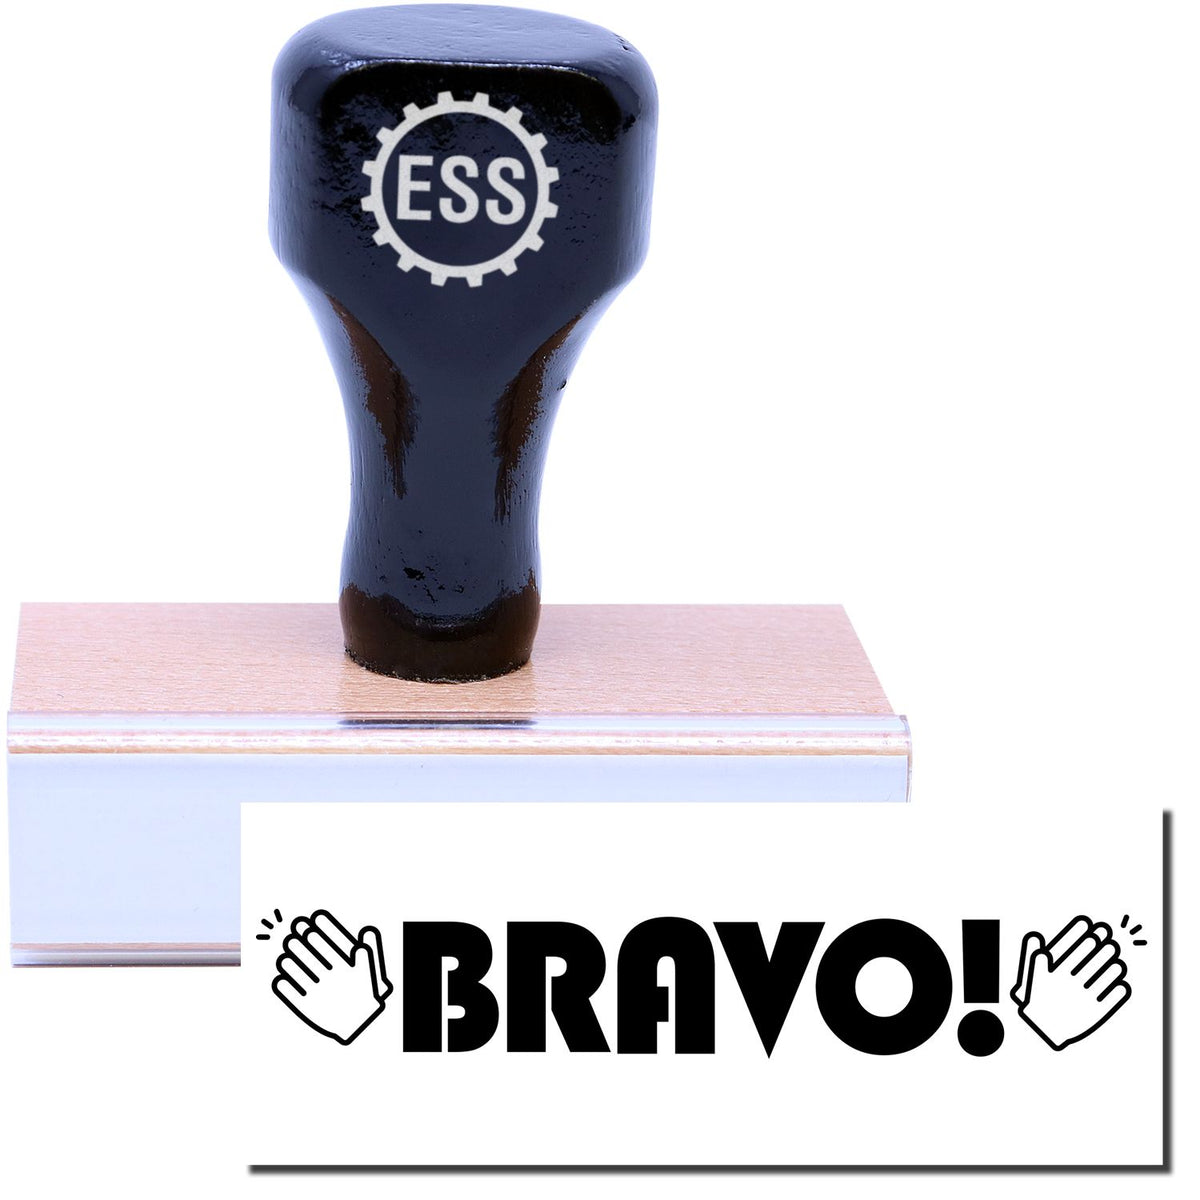 A stock office rubber stamp with a stamped image showing how the text &quot;BRAVO!&quot; with images of clapping hands on both left and right sides is displayed after stamping.